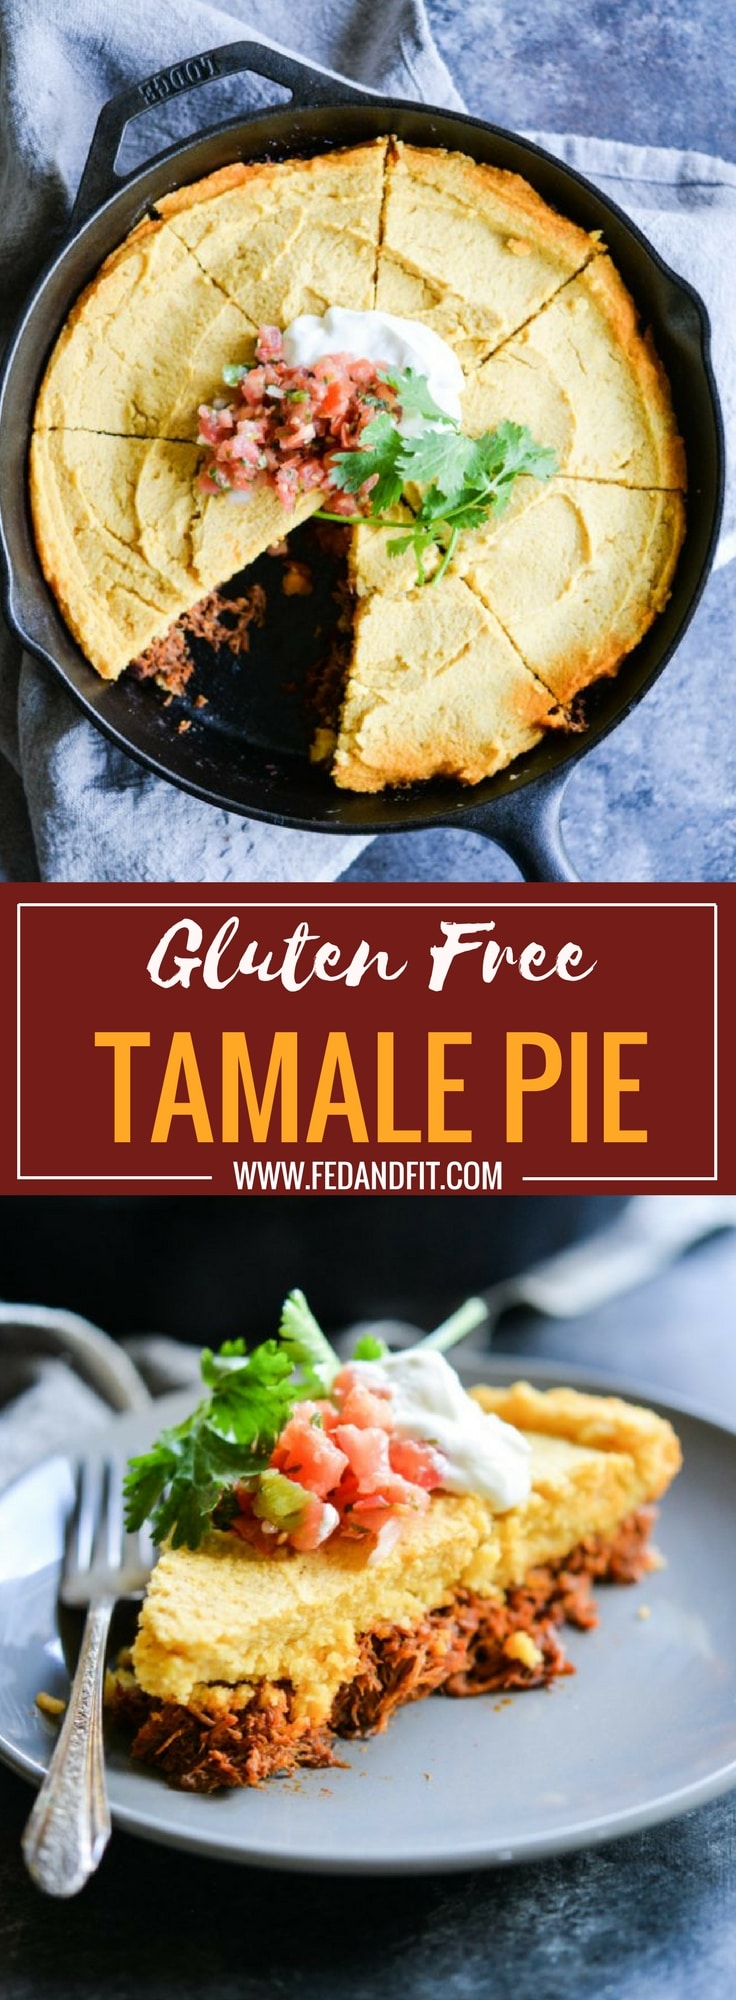 This easy tamale pie is made with a traditional pork filling and masa topping. It is the perfect flavorful casserole alternative to spending hours making traditional tamales!